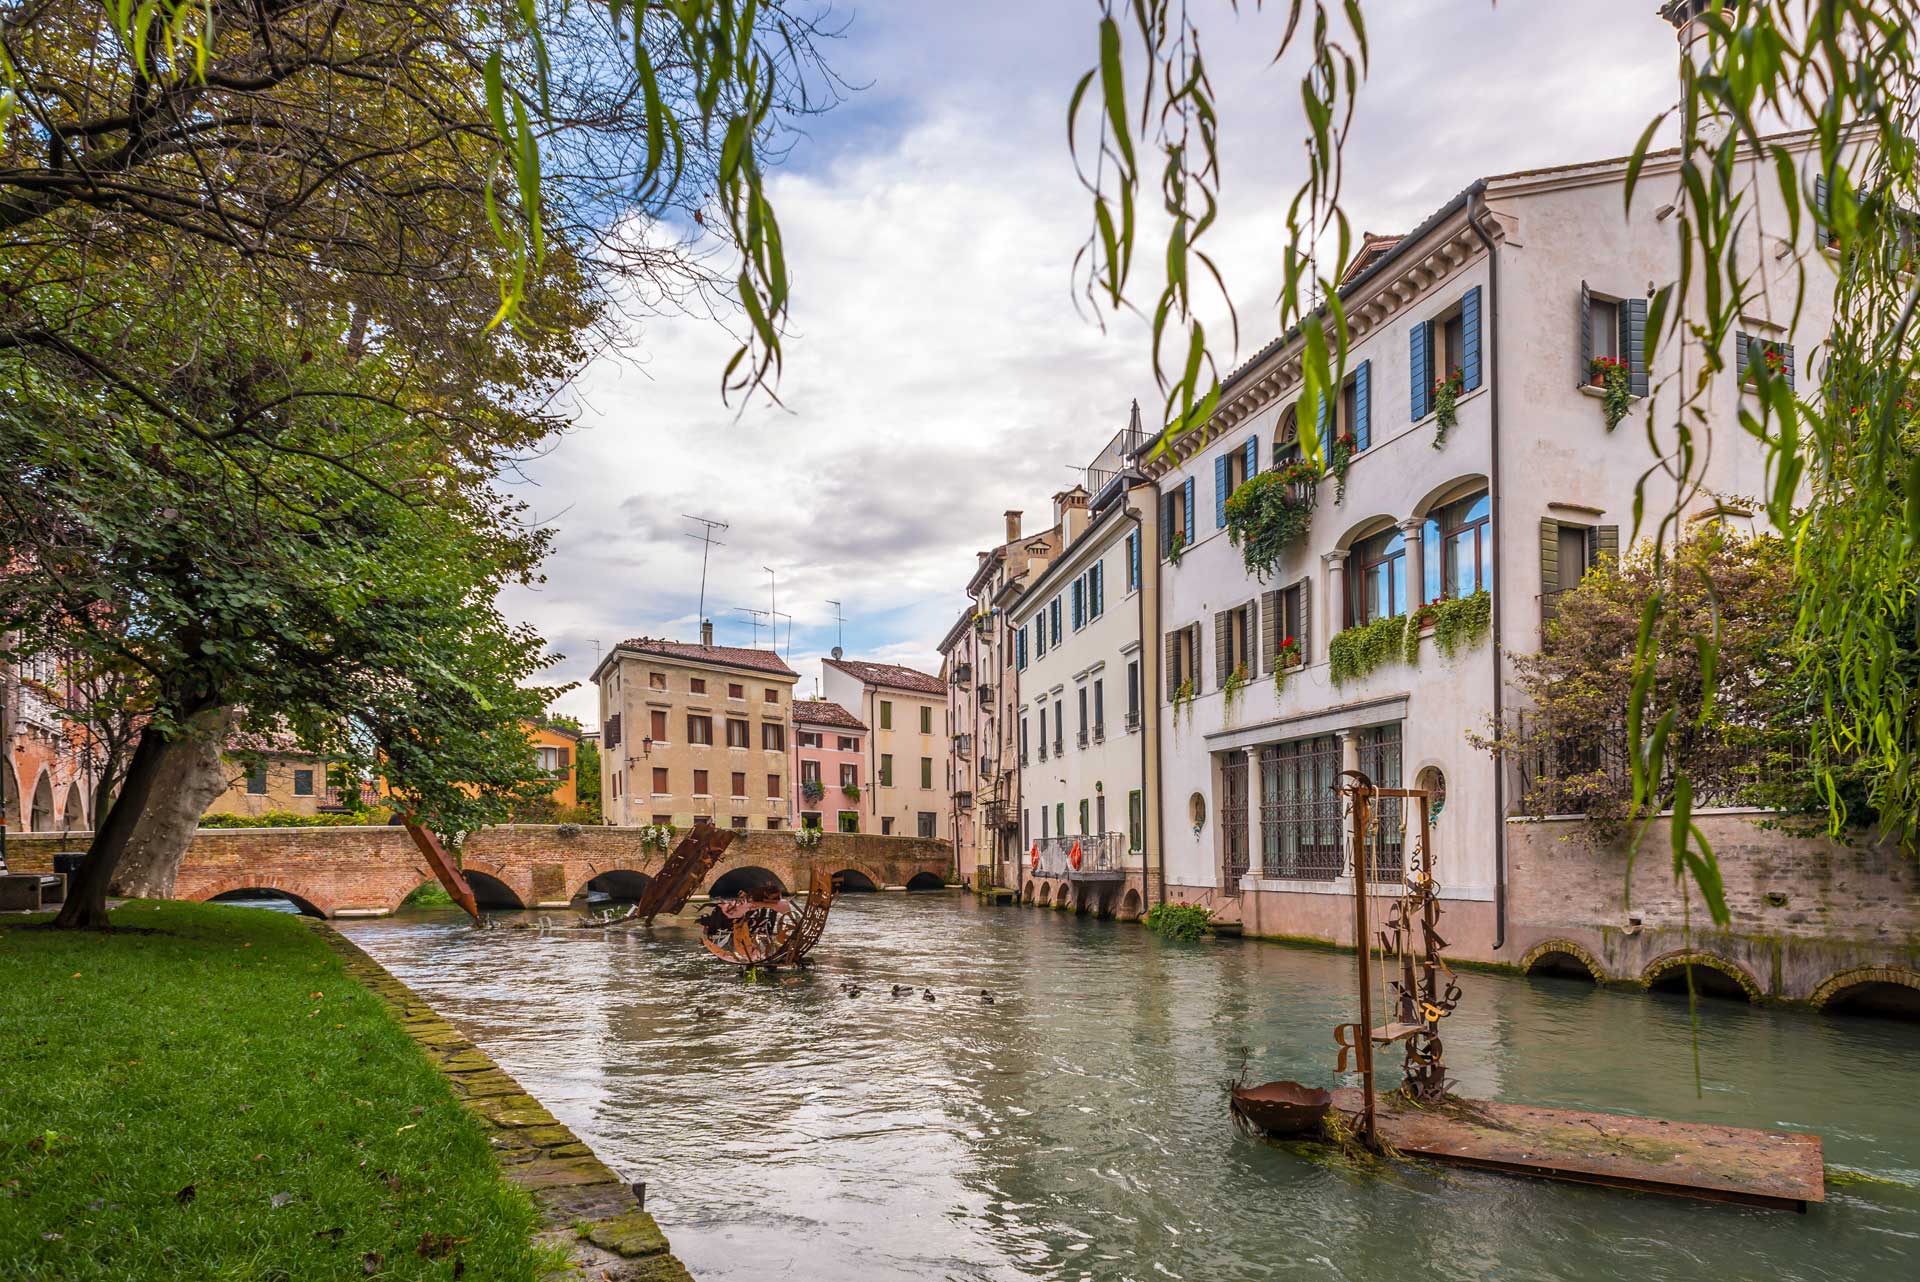 Treviso Travel Guide - Reasons to Visit this City Near Venice | Tuscany Now  & More